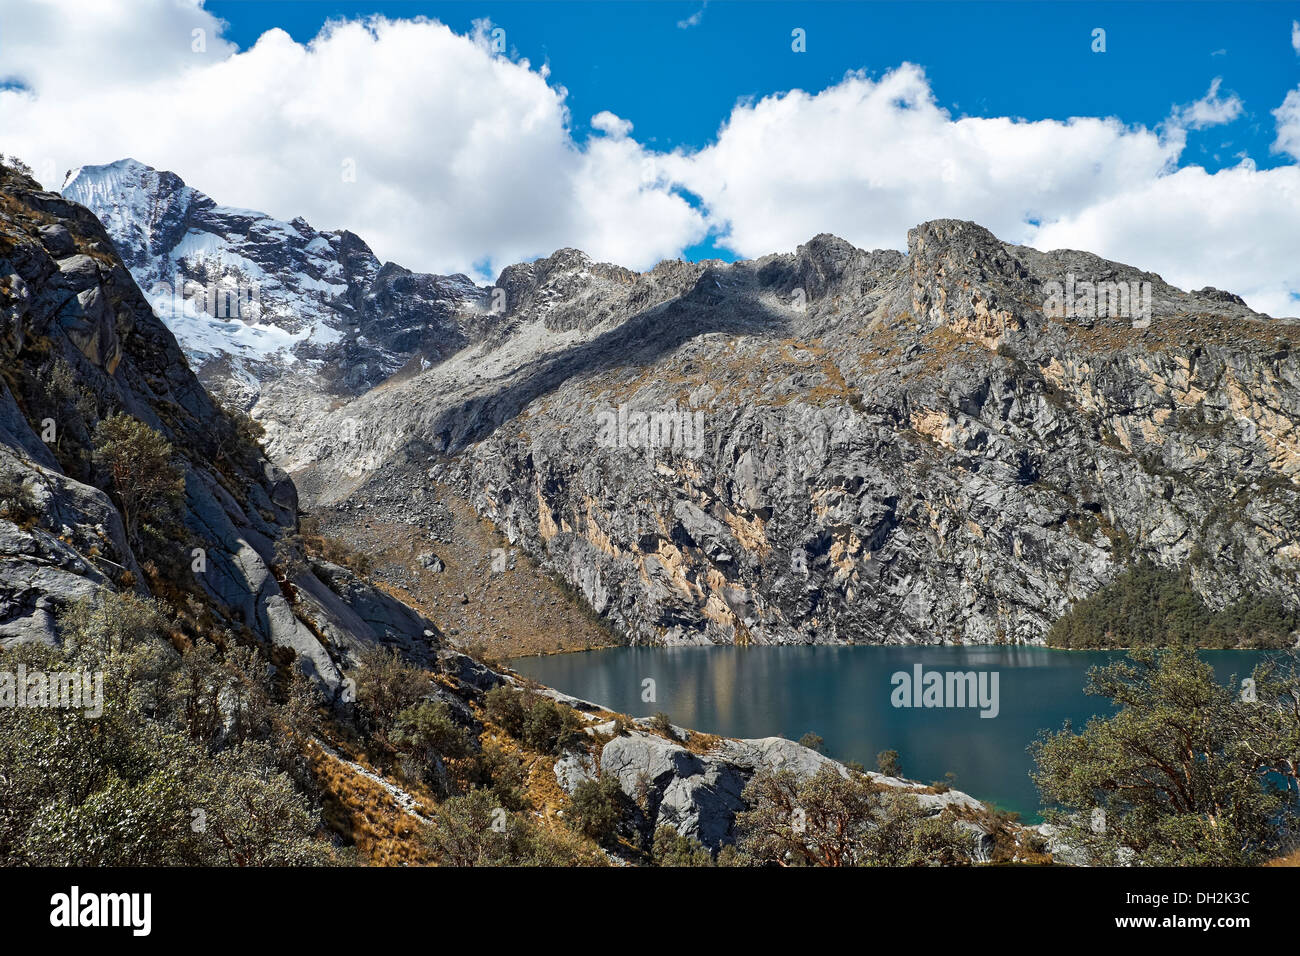 Nev Churup Summit and Laguna, Huascaran National Park in the Andes, South America. Stock Photo